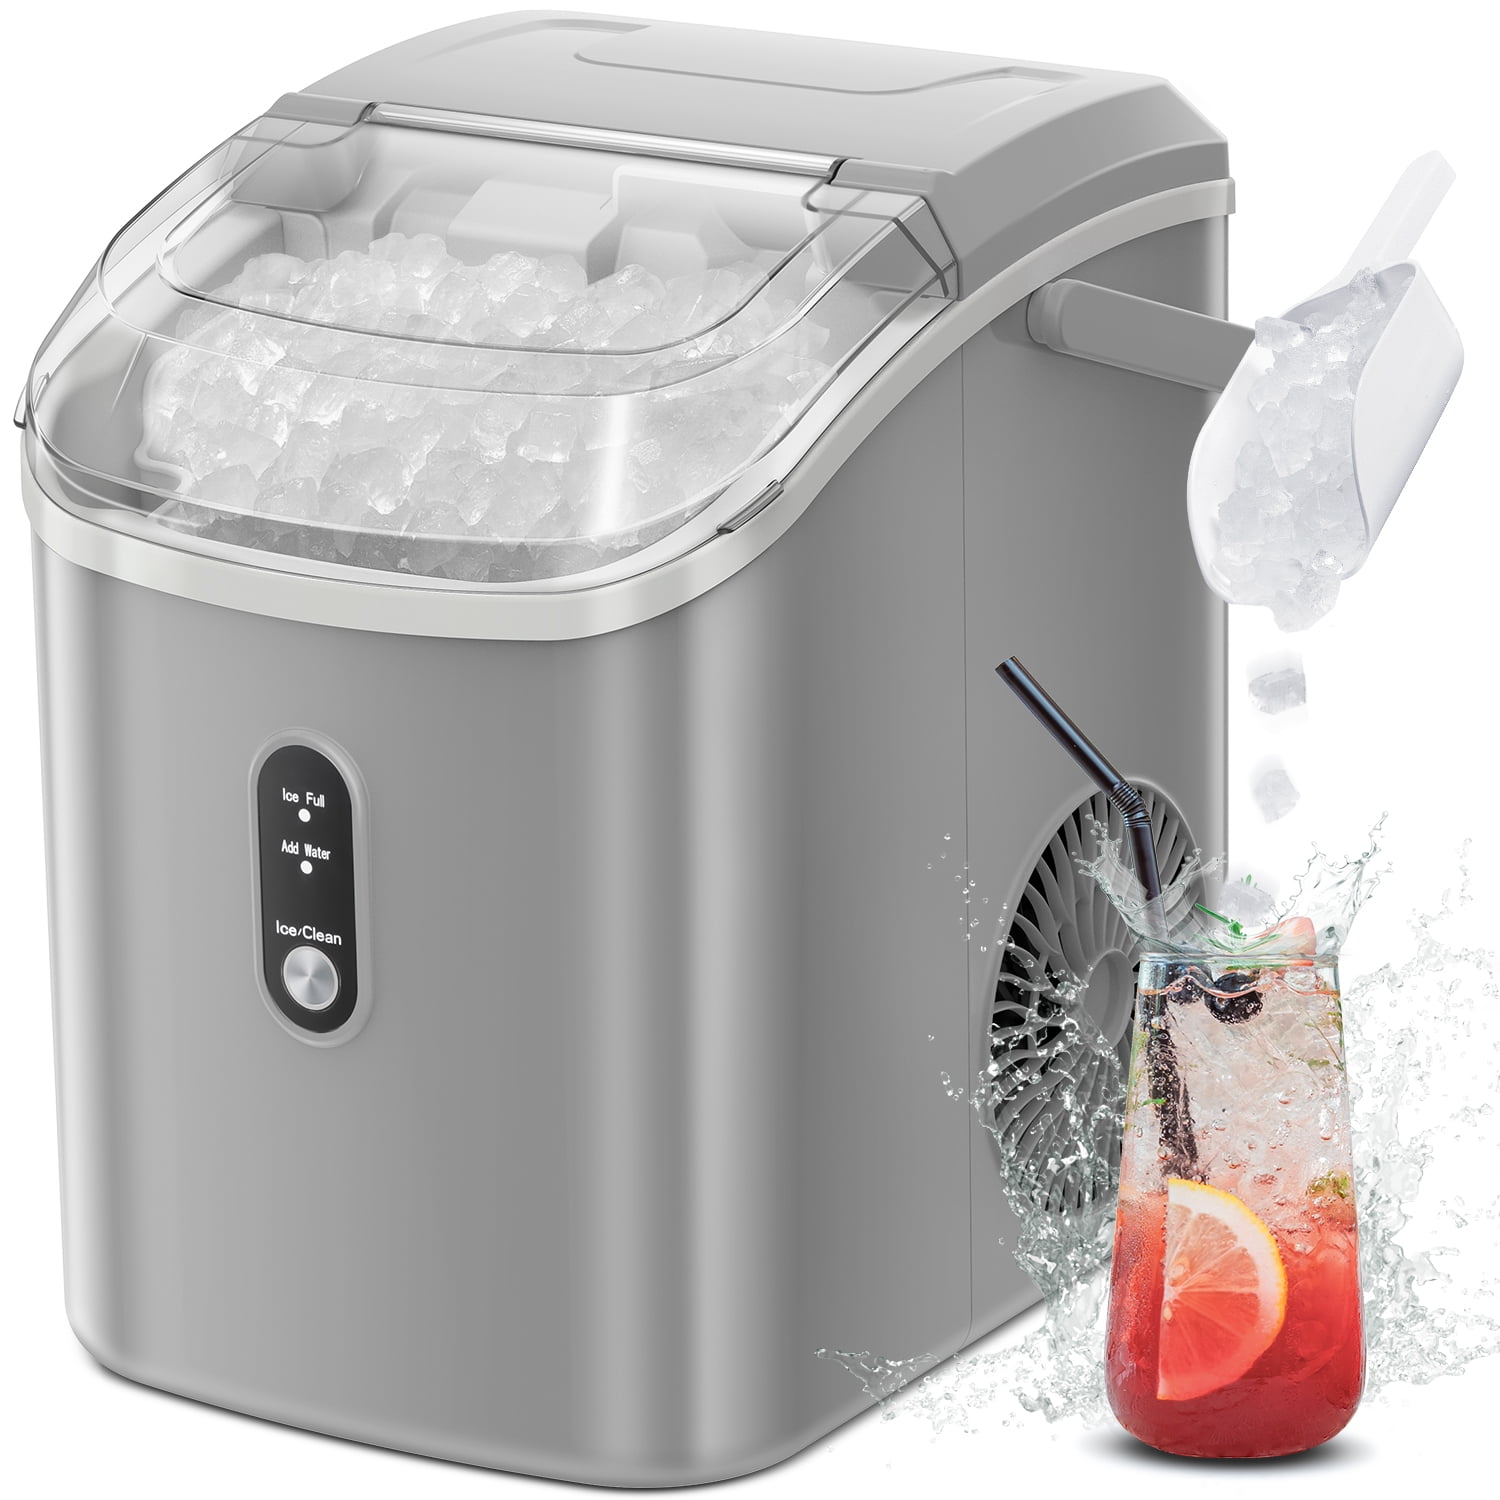  Nugget Ice Maker Countertop with Chewable Ice, 35lbs/Day,  Portable Ice Maker Countertop with Handle, One-Click Operation, Compact  Design Crushed Pellet Ice Maker for Home & Kitchen(Black) : Appliances